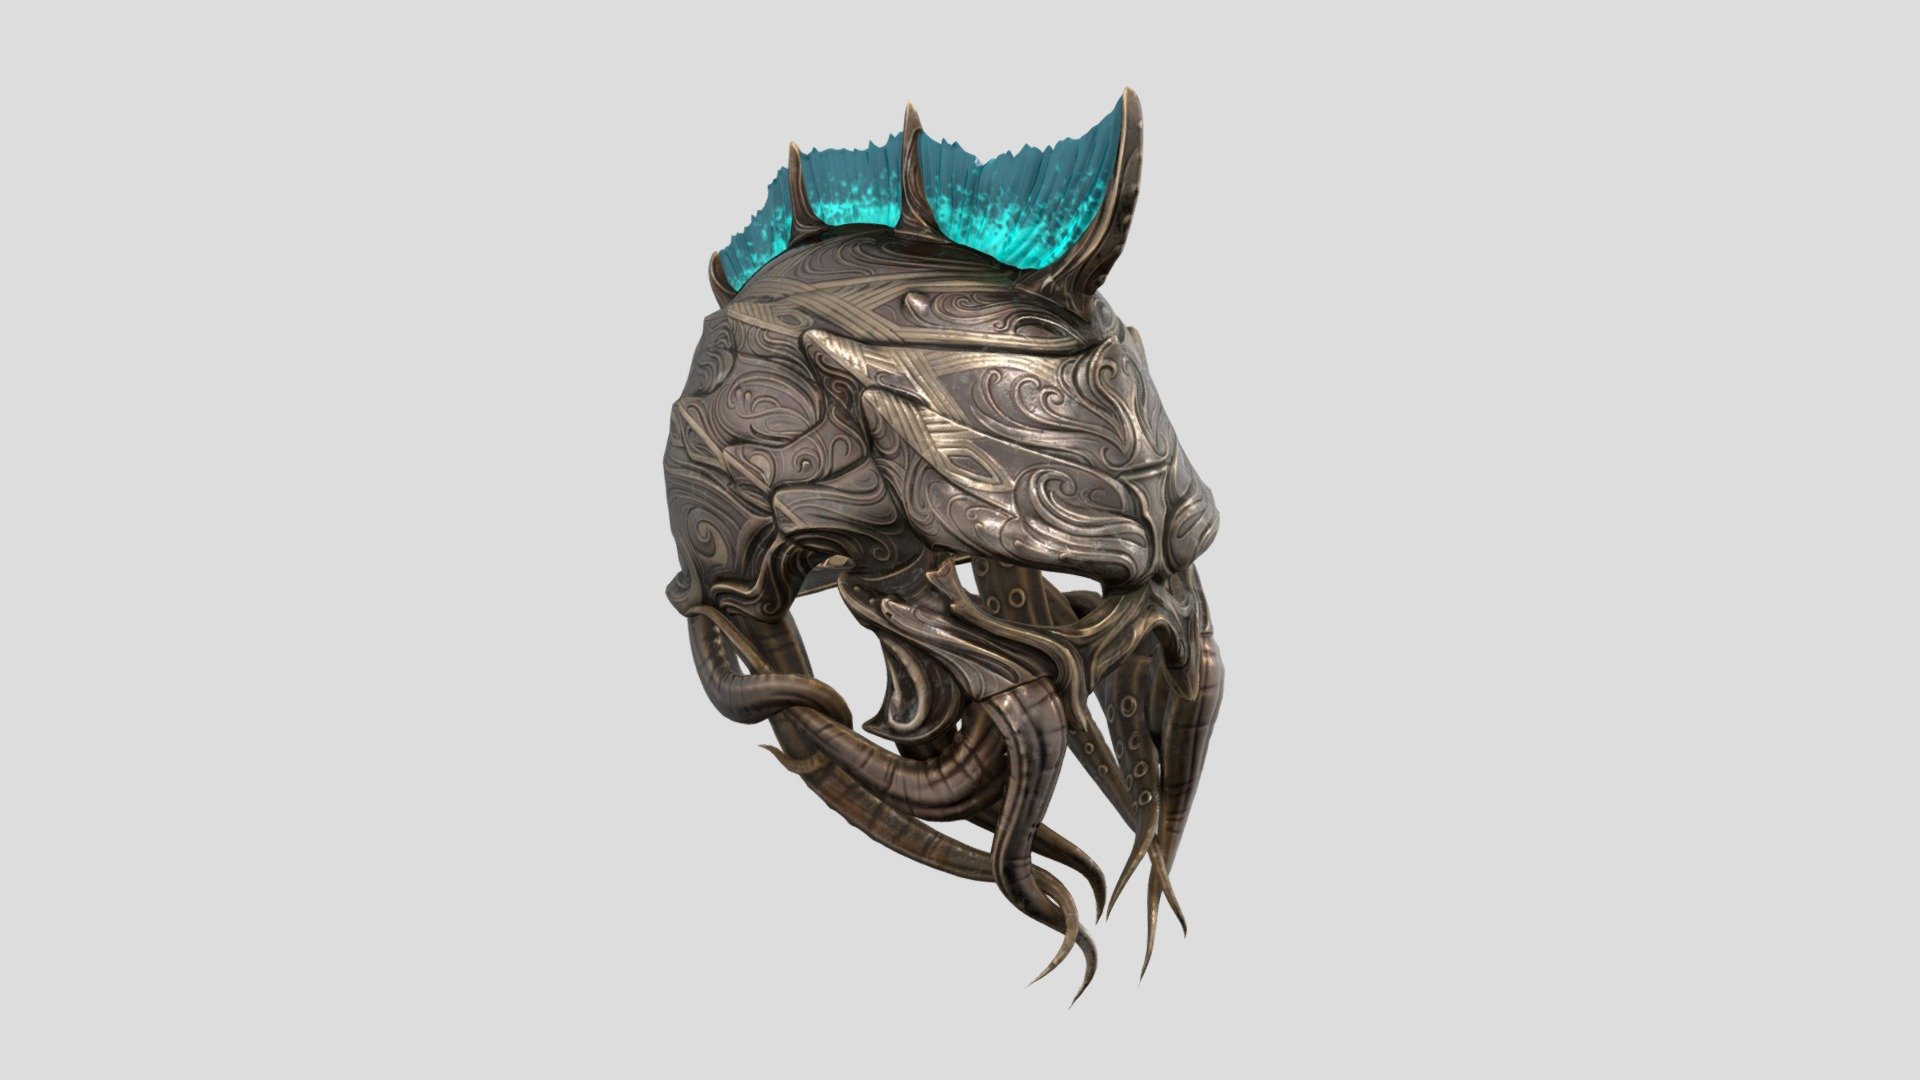 Atlantean Helmet is an optimized model with excellent texturing for best outcome.

The model has an optimized low poly mesh with the greatest possible number of simplifications that do not affect photo-realism but can help to simplify it, thus lightening your scene and allowing for using this model in real-time 3d applications.

In this product, all objects are ERROR-FREE. All LEGAL Geometry. Subdivisions are not required for this product. Real-world accurate model.


Format Type



3ds Max 2017 (Standard Material)

FBX

OBJ


Texture Type



Diffuse

Specular

Glossiness

Normal

AO

You might need to re-assign textures map to model in your relevant software

You might need to flip green channel of Normal map according to your relevant softwar - Atlantean Helmet - Buy Royalty Free 3D model by luxe3dworld 3d model